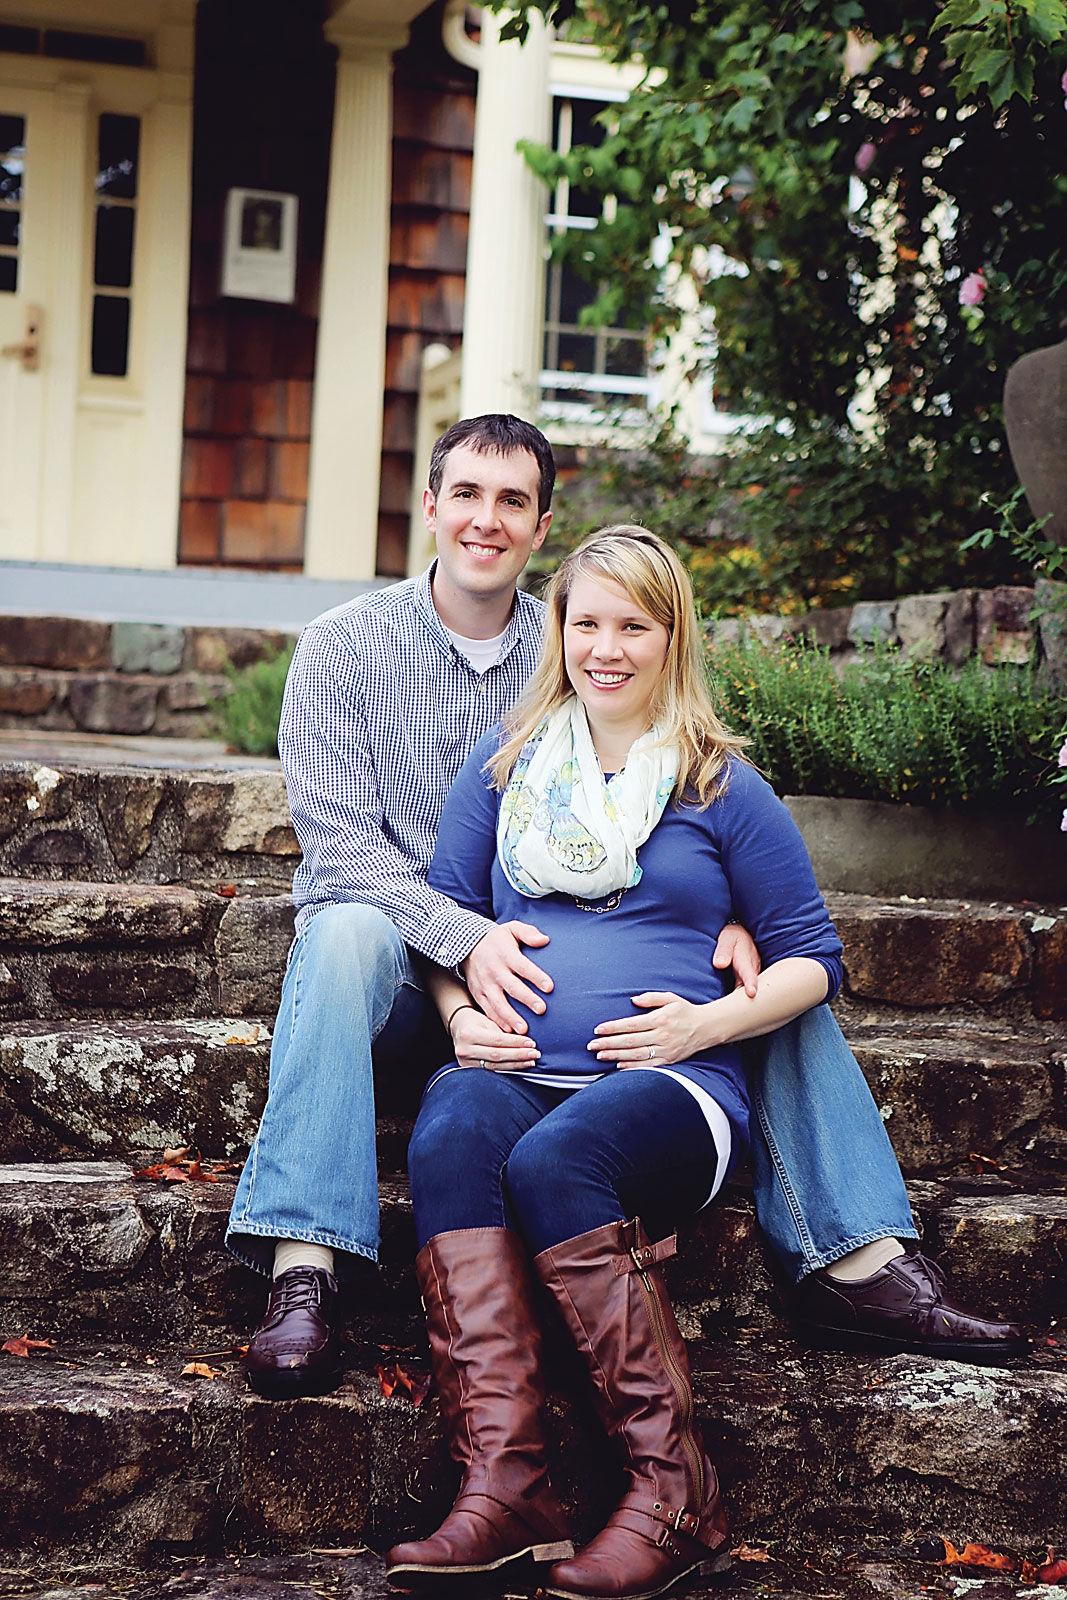 morristown morris county nj maternity pictures